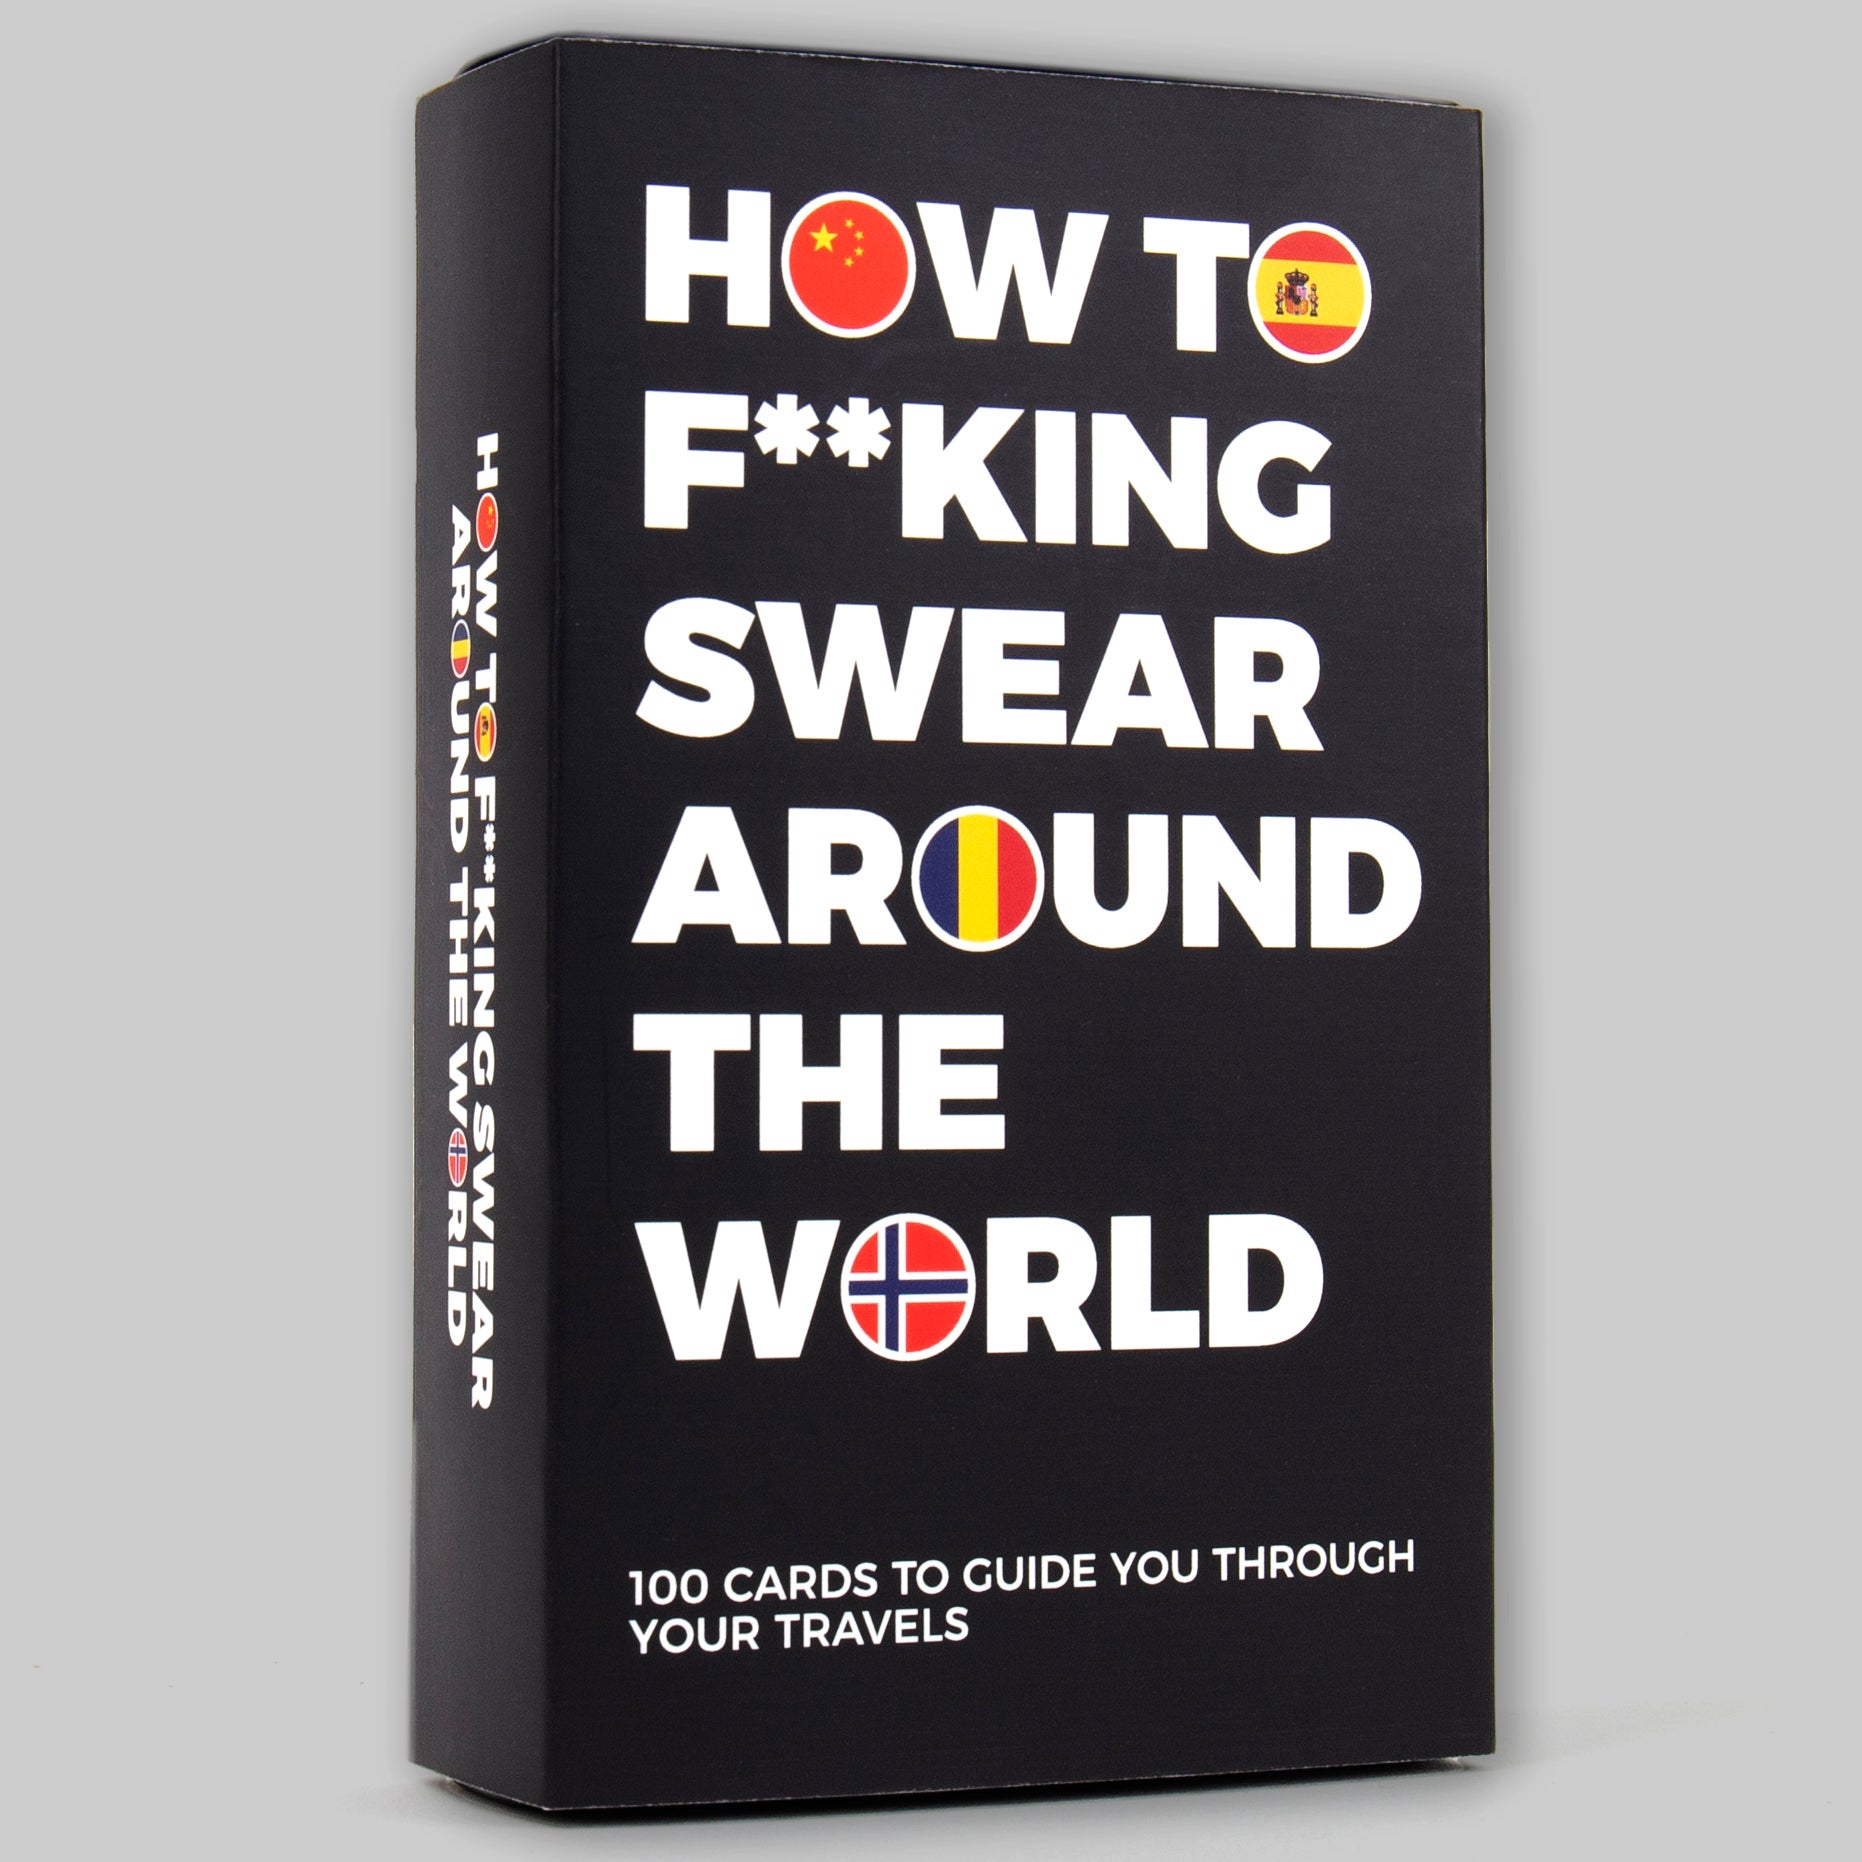 Flash Cards - "How to F**King Swear Around the World" - Explicit